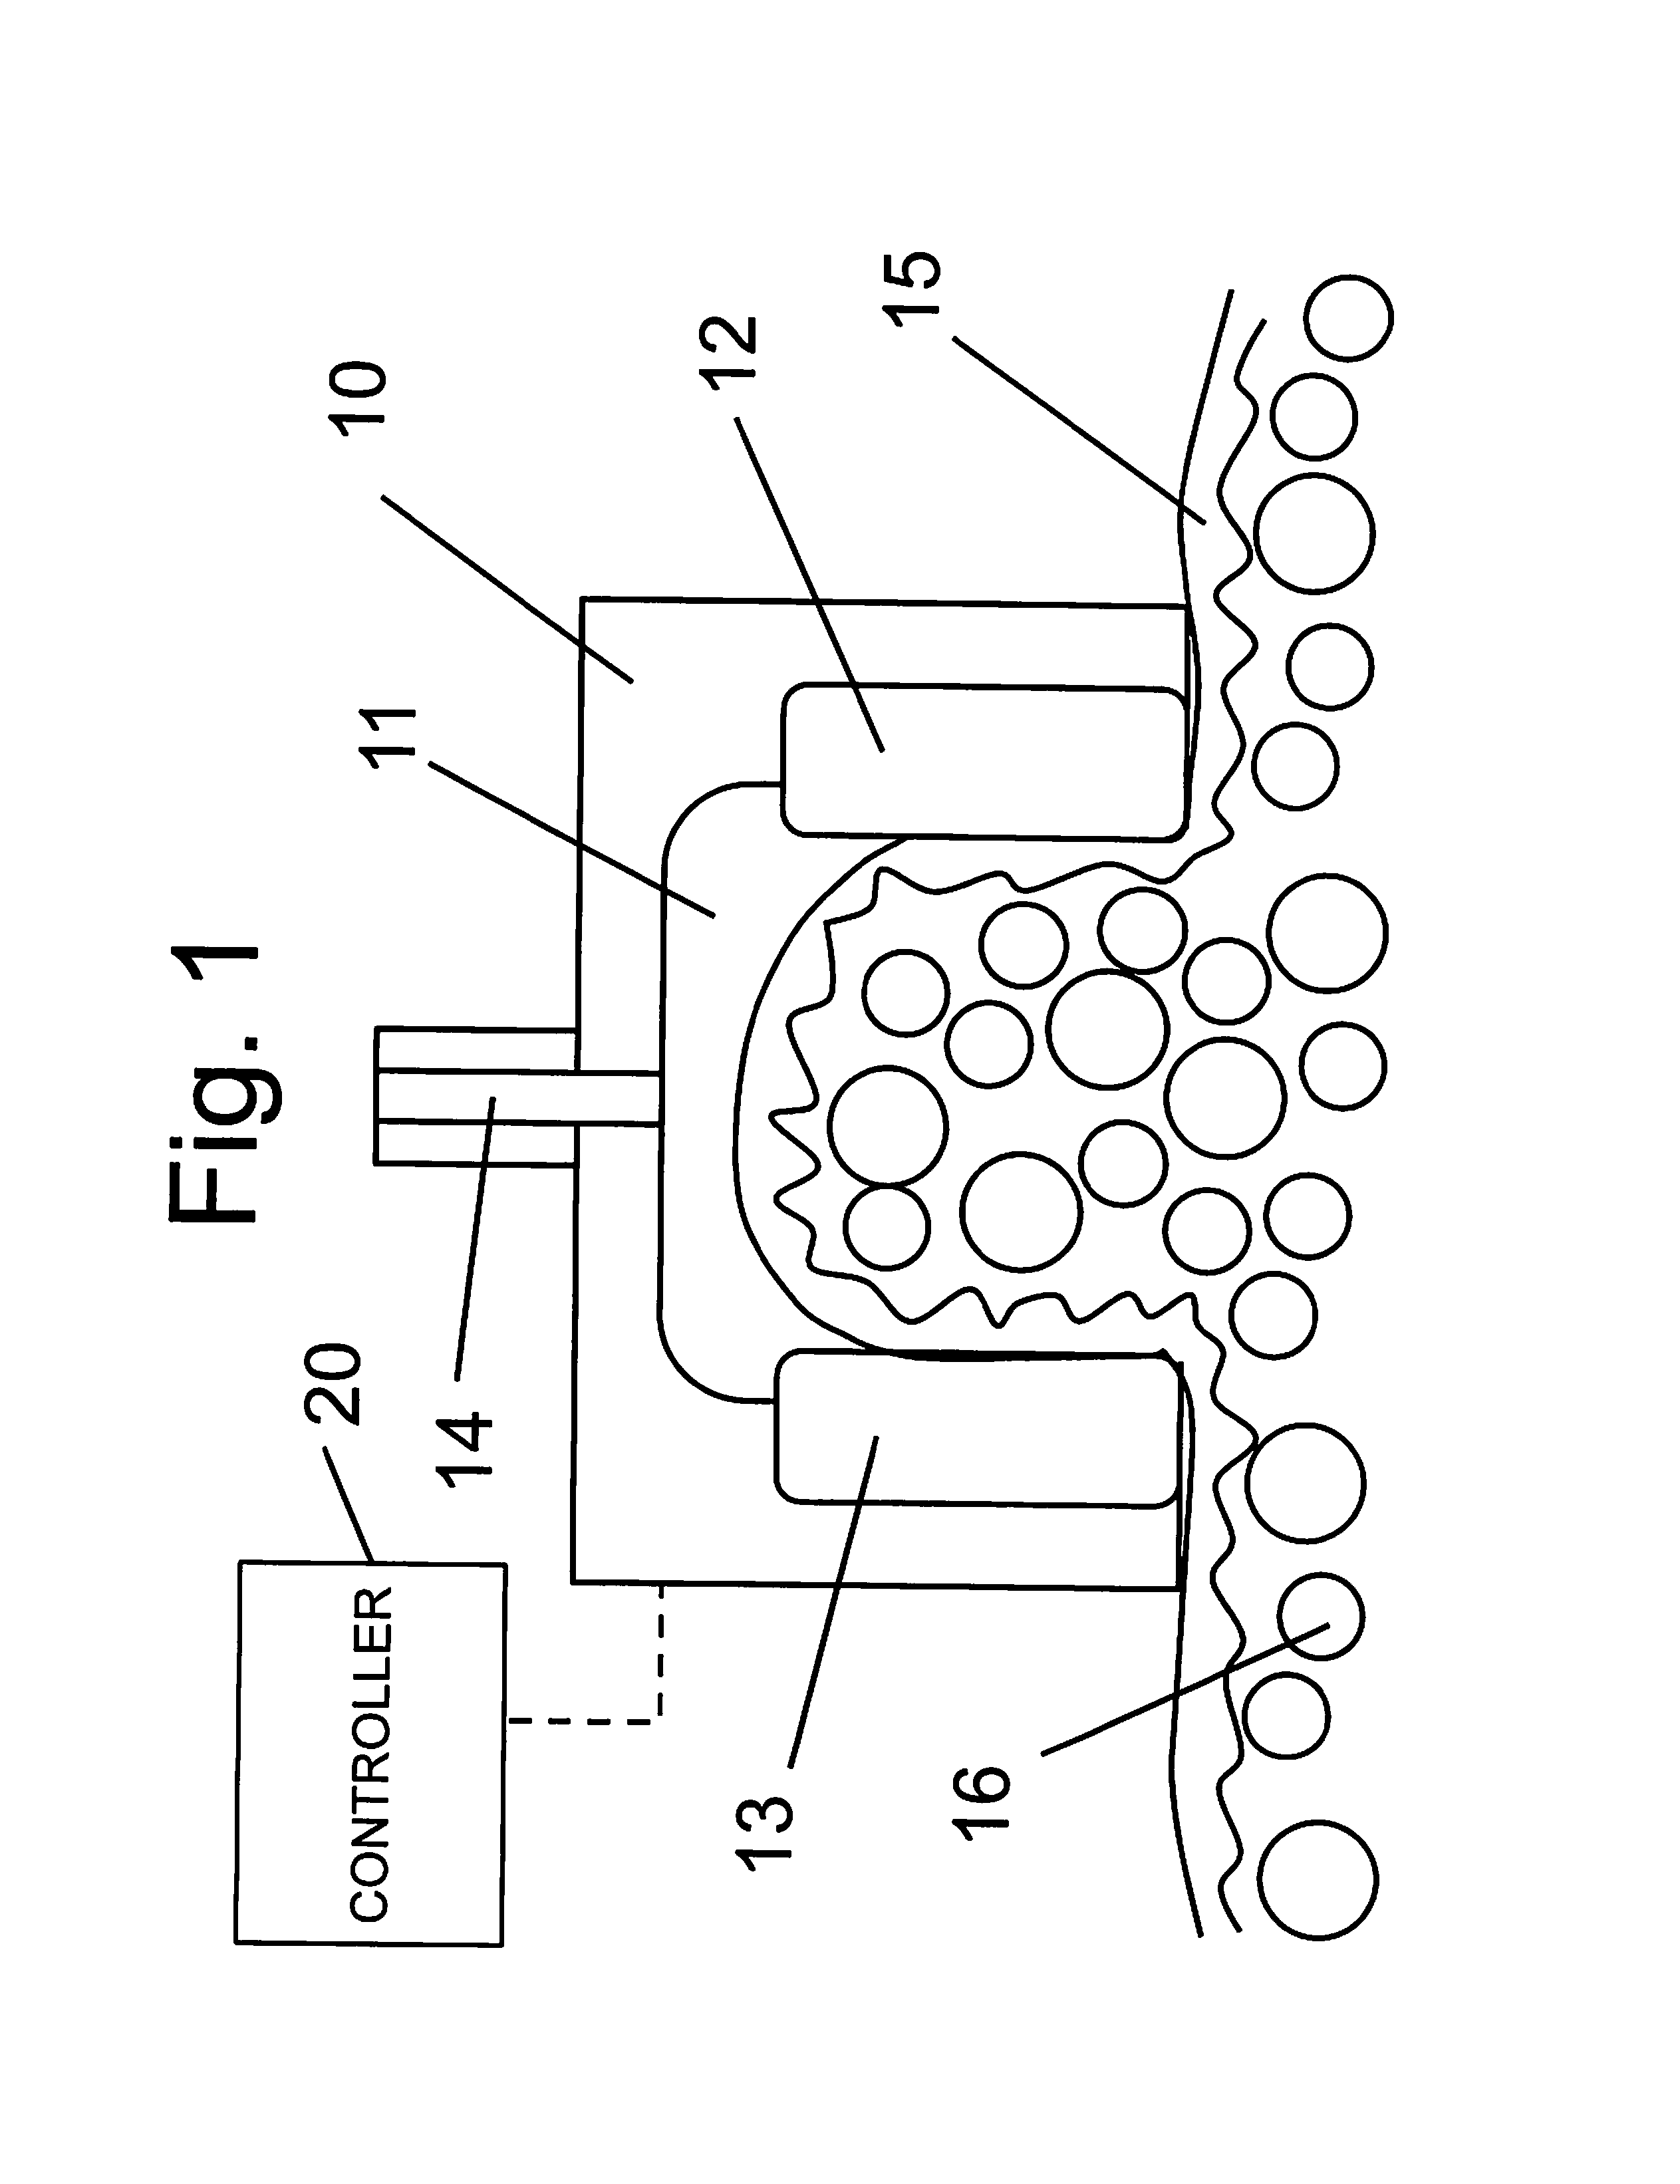 System and method for tissue treatment using non-symmetric radio-frequency energy waveform